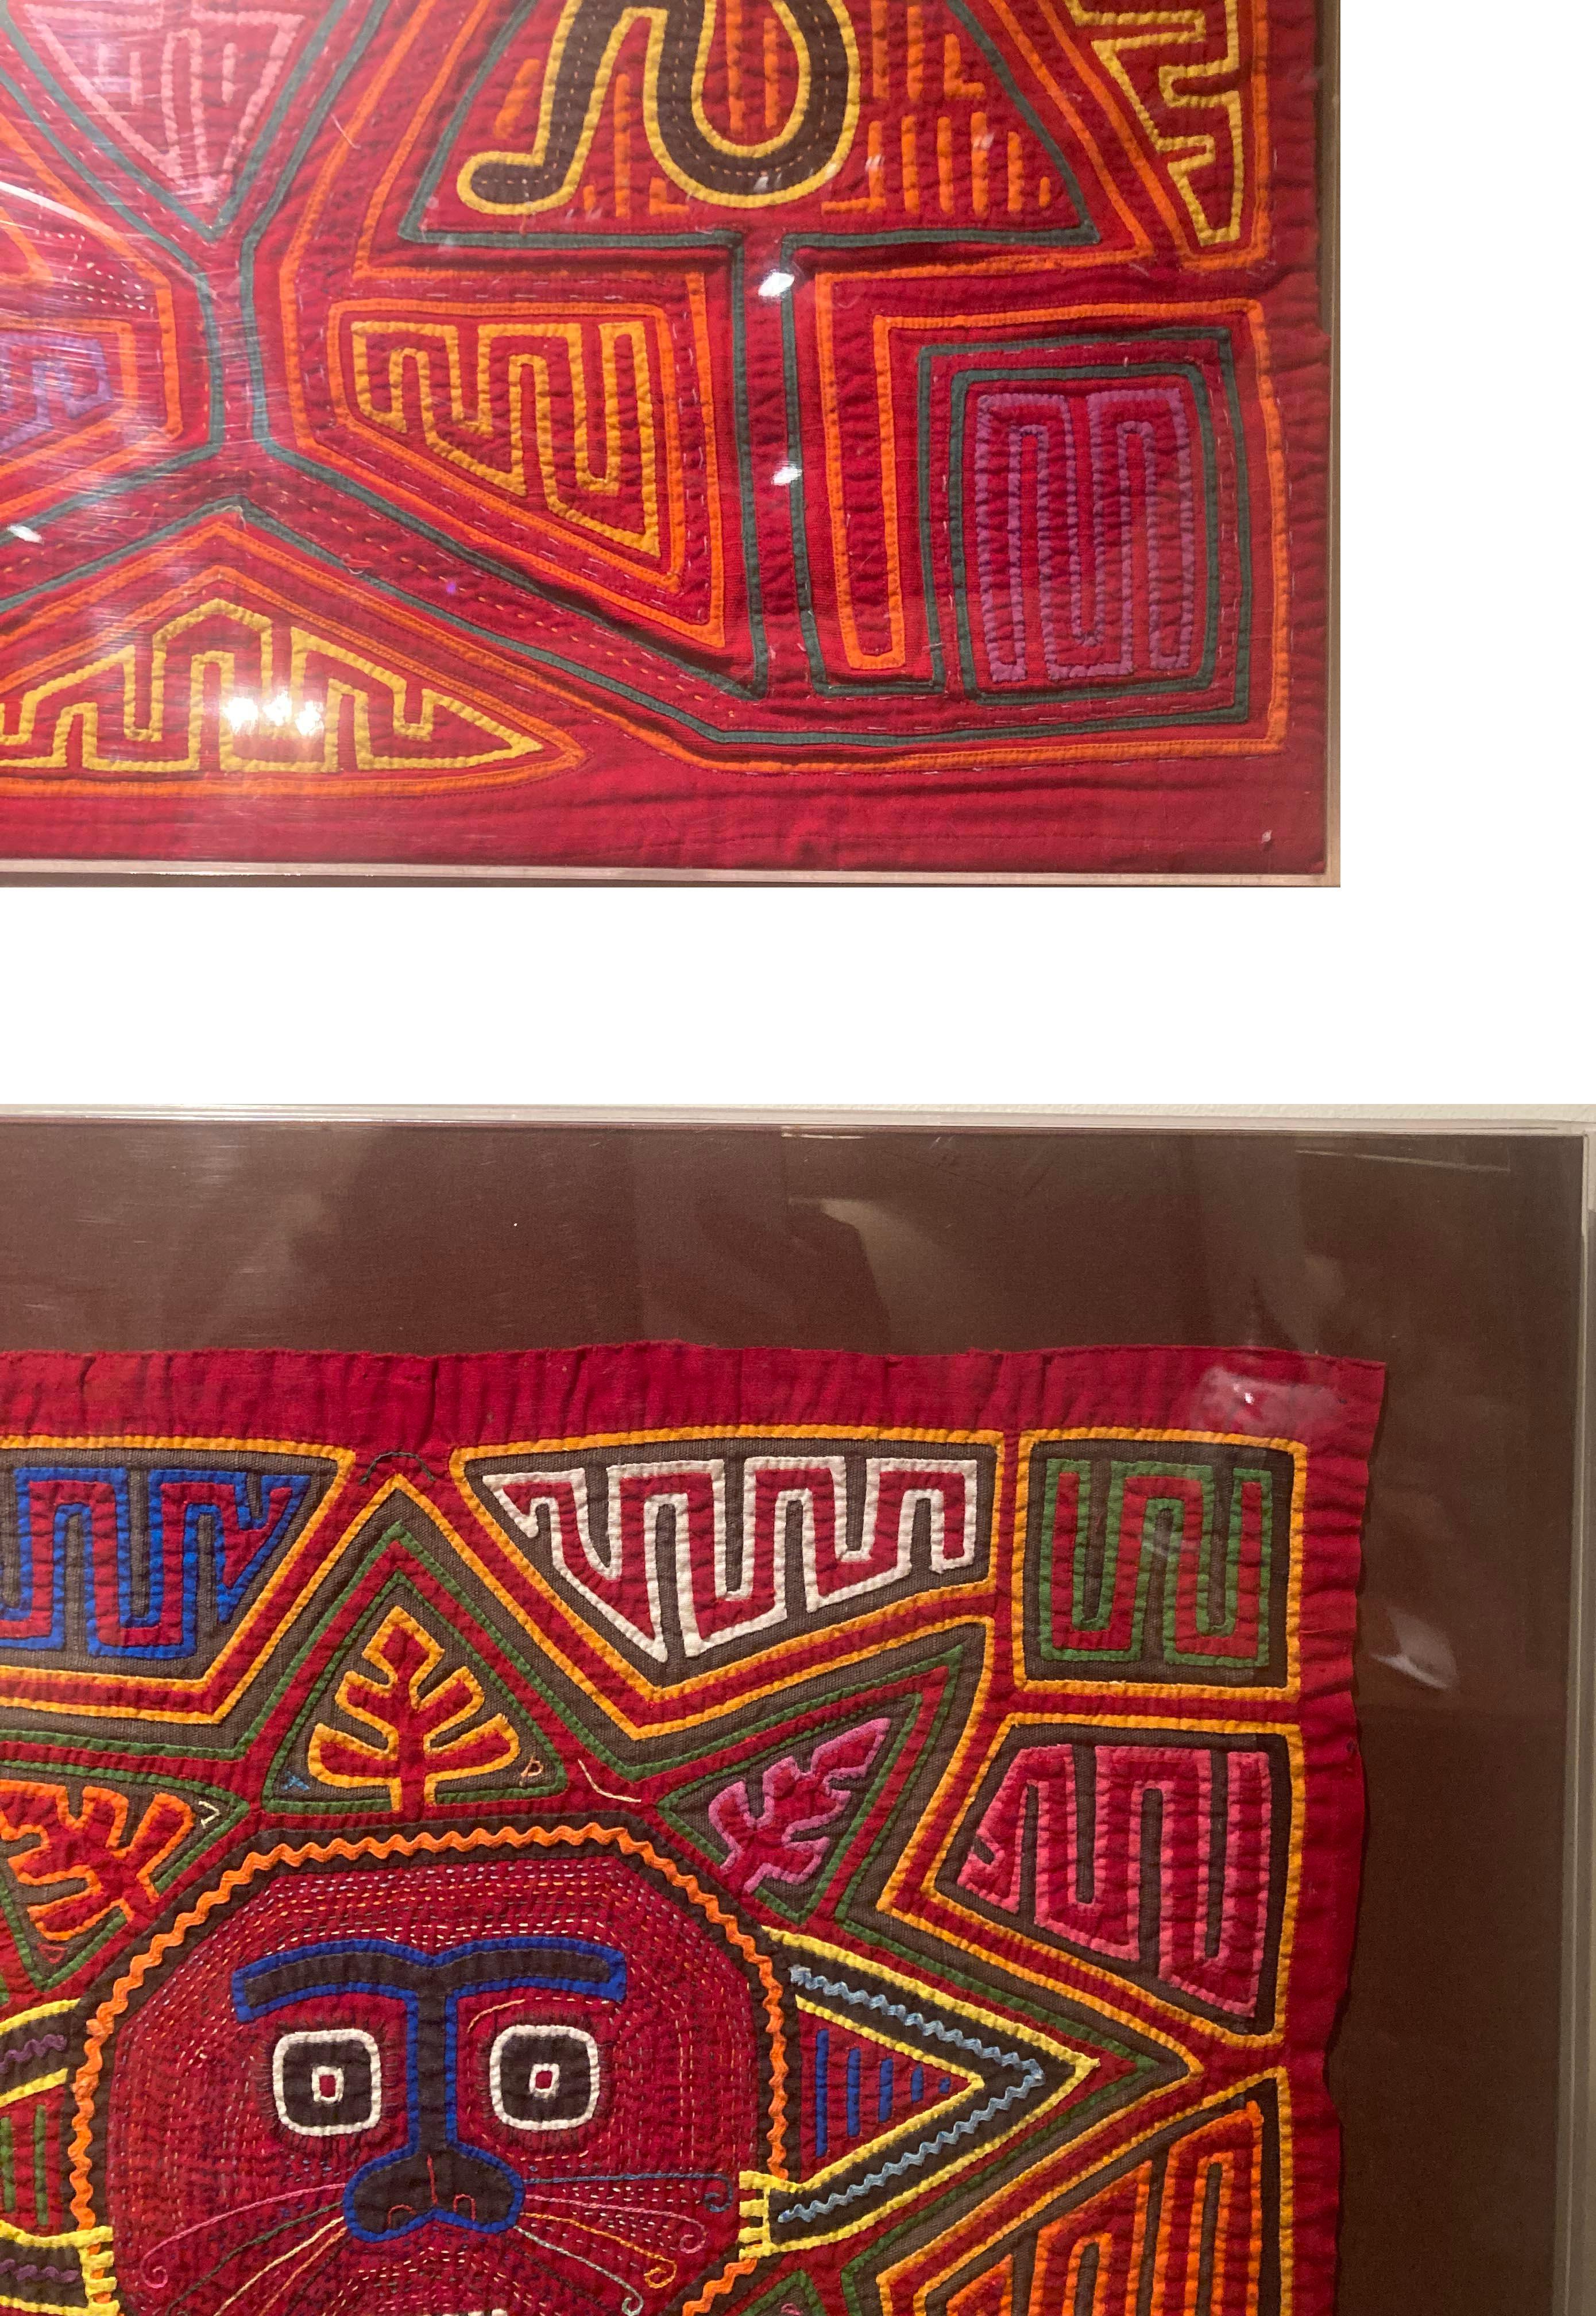 Set of six hand-sewn Mola reverse appliqué textiles framed in plexiglass cases and mounted on brown cotton fabric. These are in great condition with little to no damage or color discoloration of the fabric. Wonderful, vibrant colors.